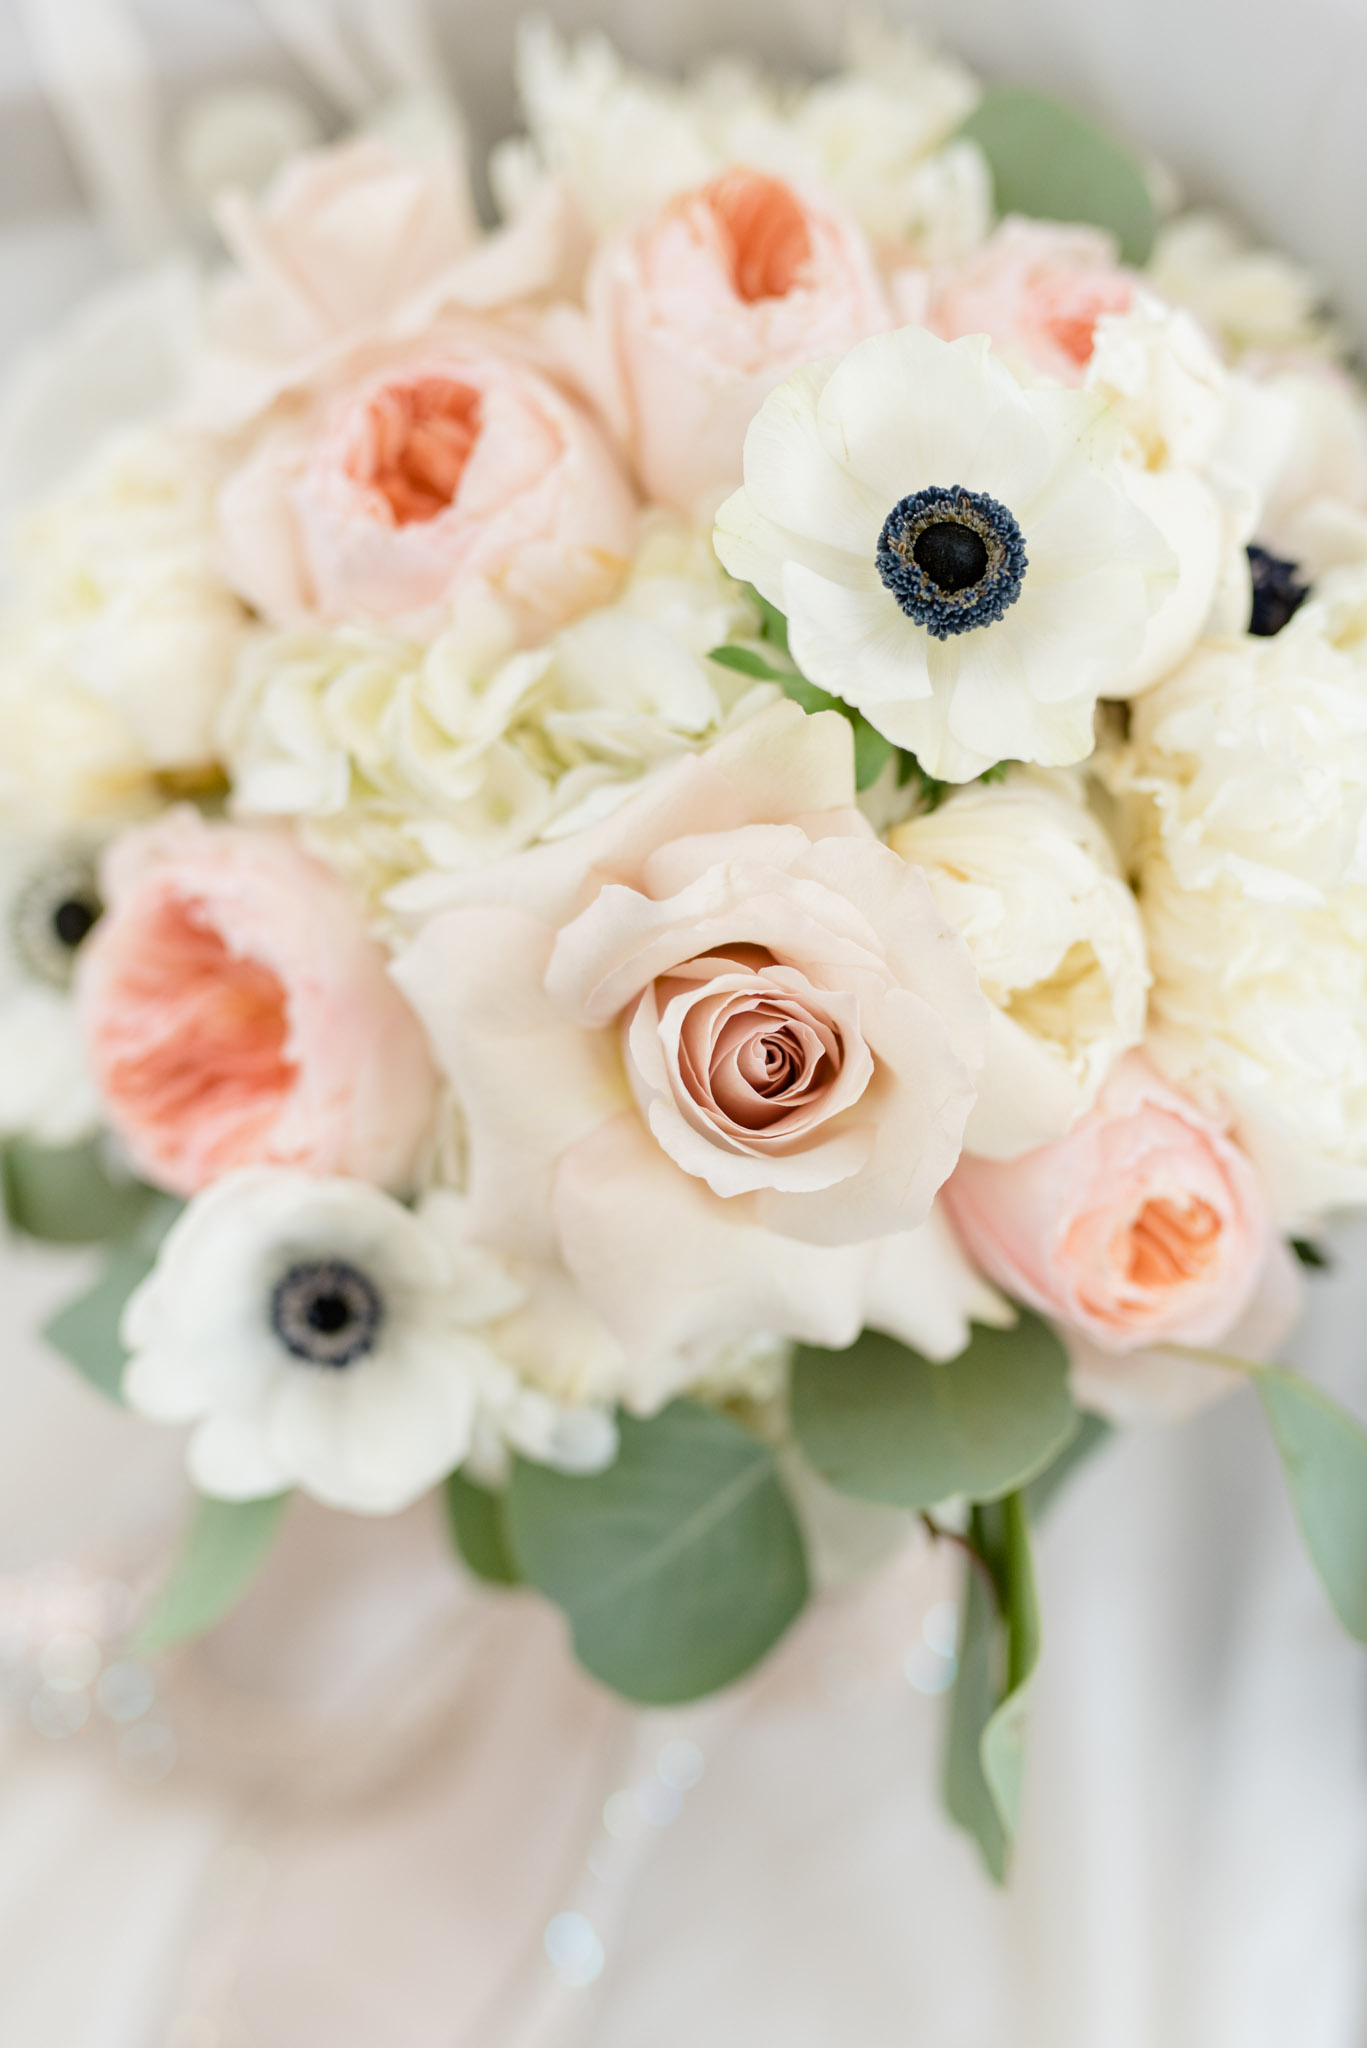 Bridal bouquet with pink and white flowers.